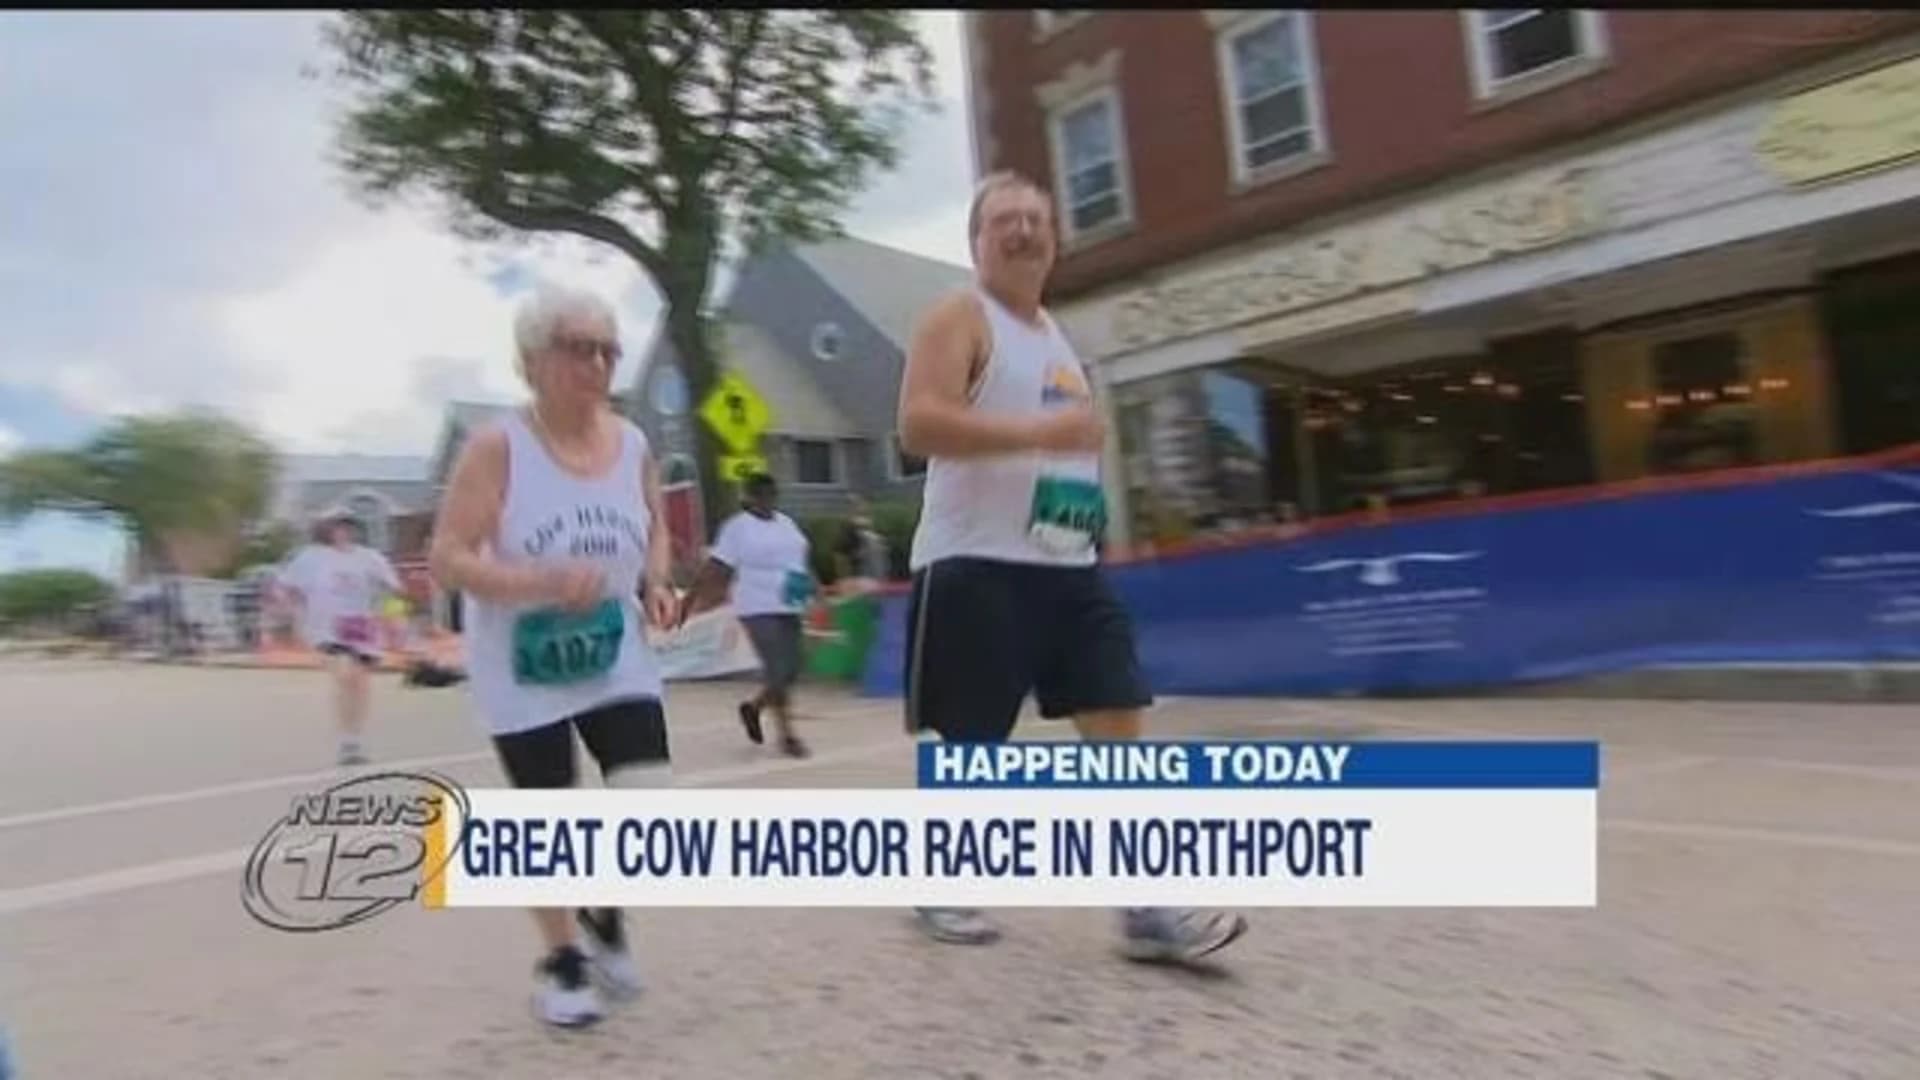 41st annual Great Cow Harbor Race draws thousands of runners